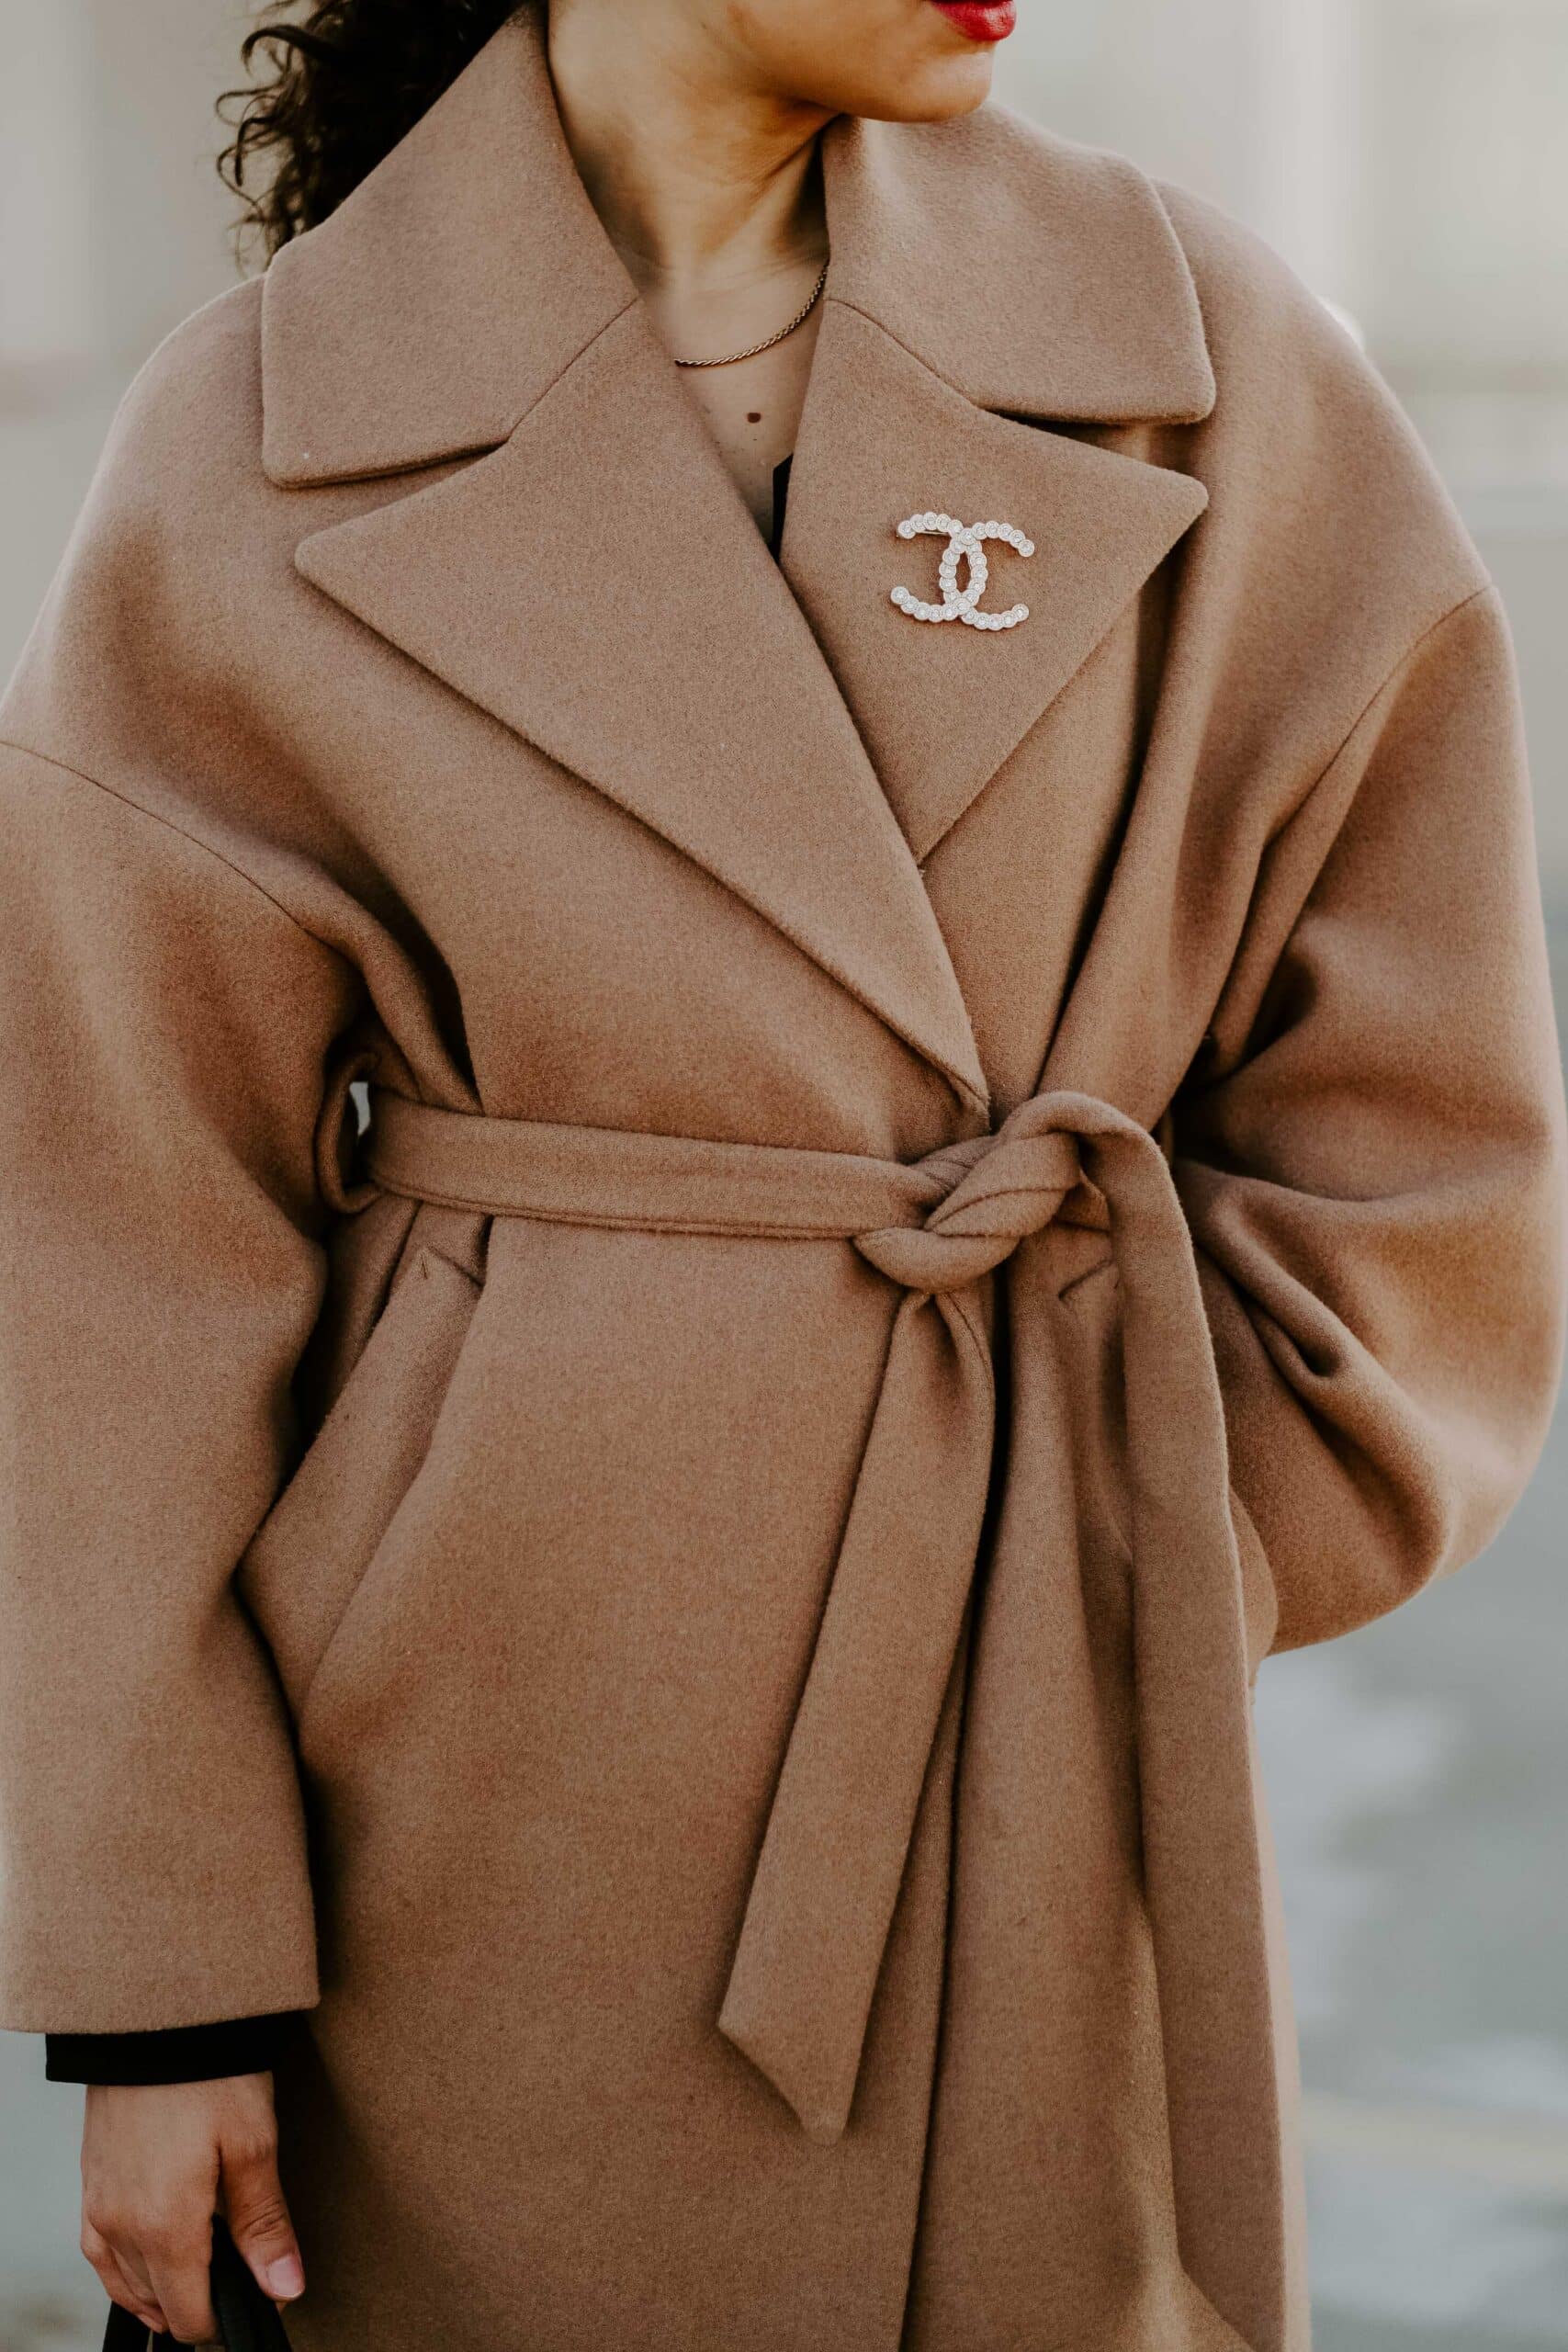 camel coat brooch outfit